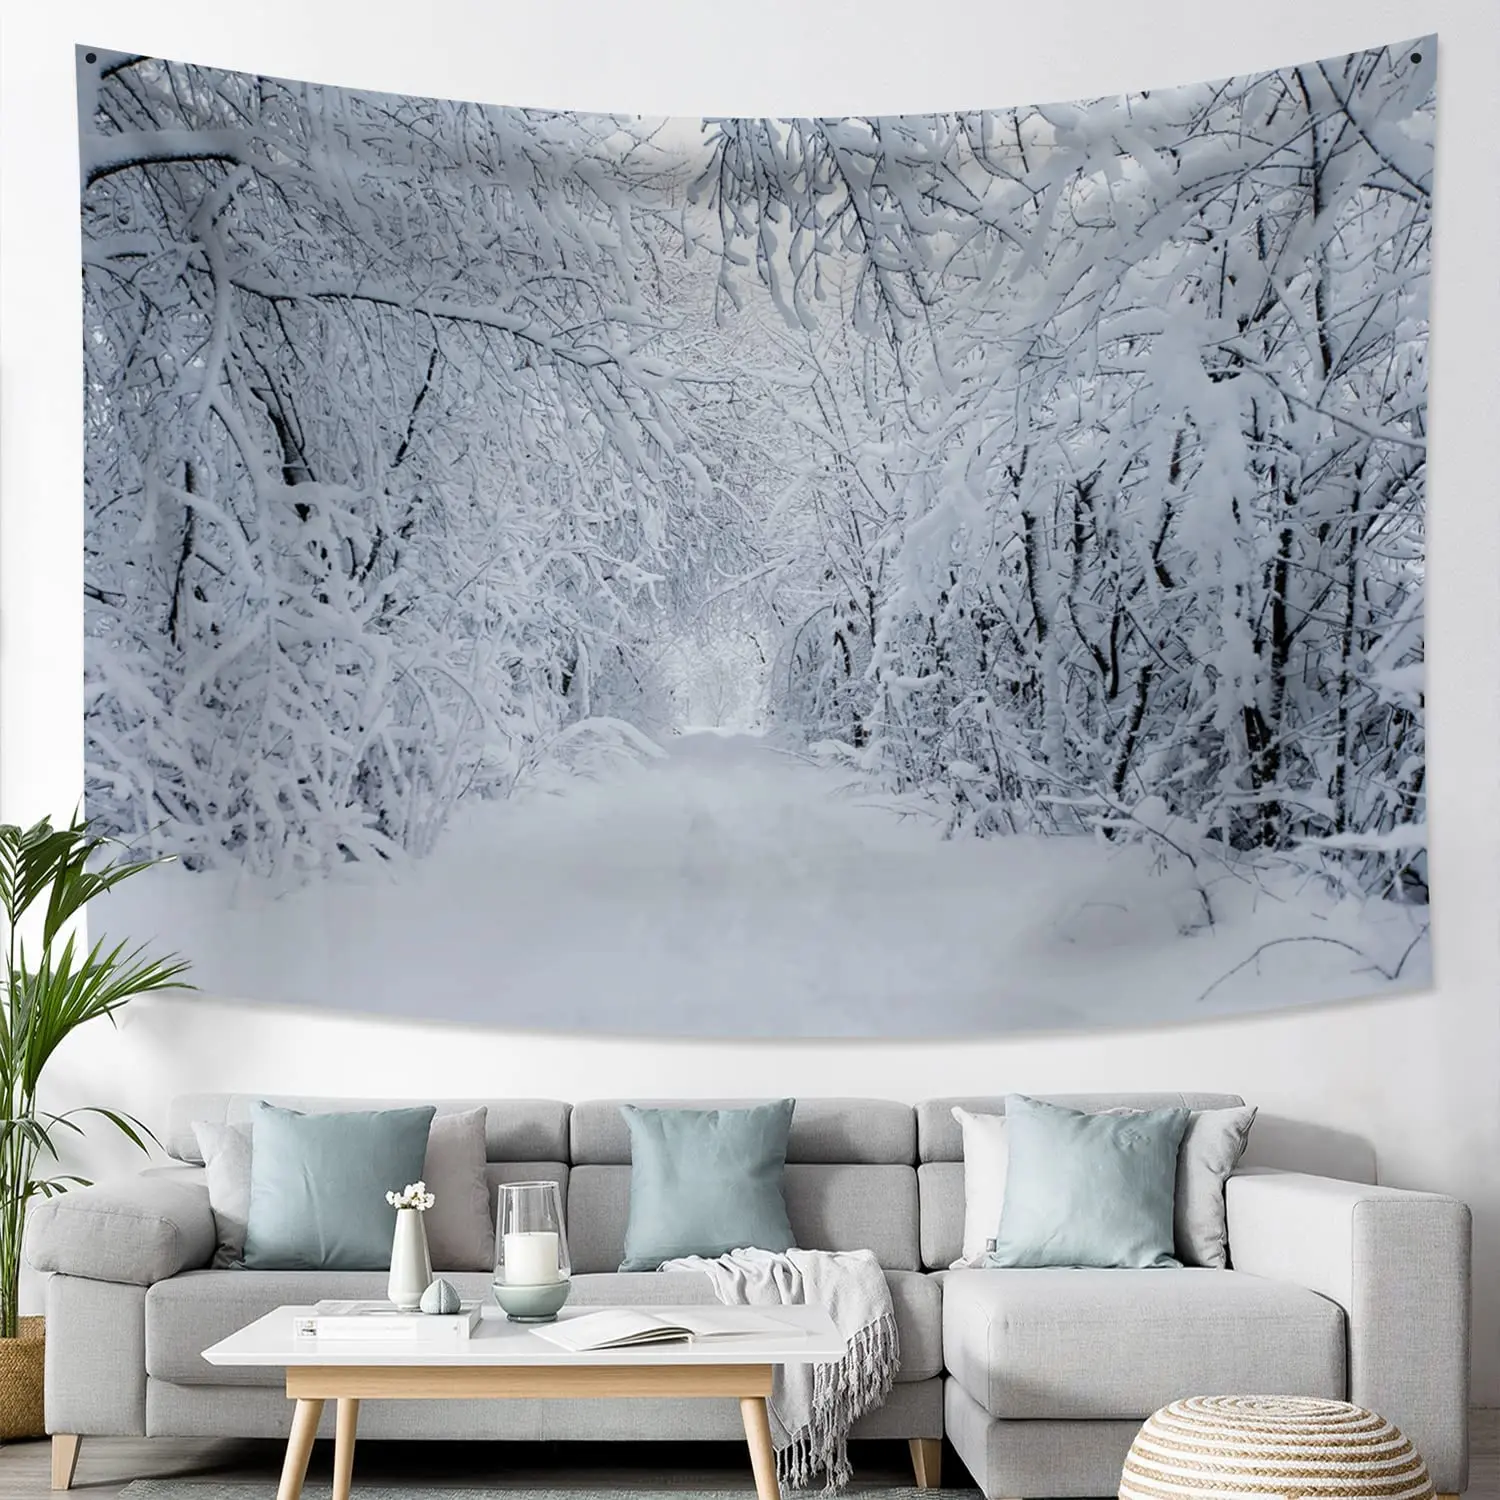 

Fantasy Trees In Snowy Forest Tapestry Wall Hanging Christmas Wonderland Tapestry Wall Art for Bedroom Living Room Party Decor